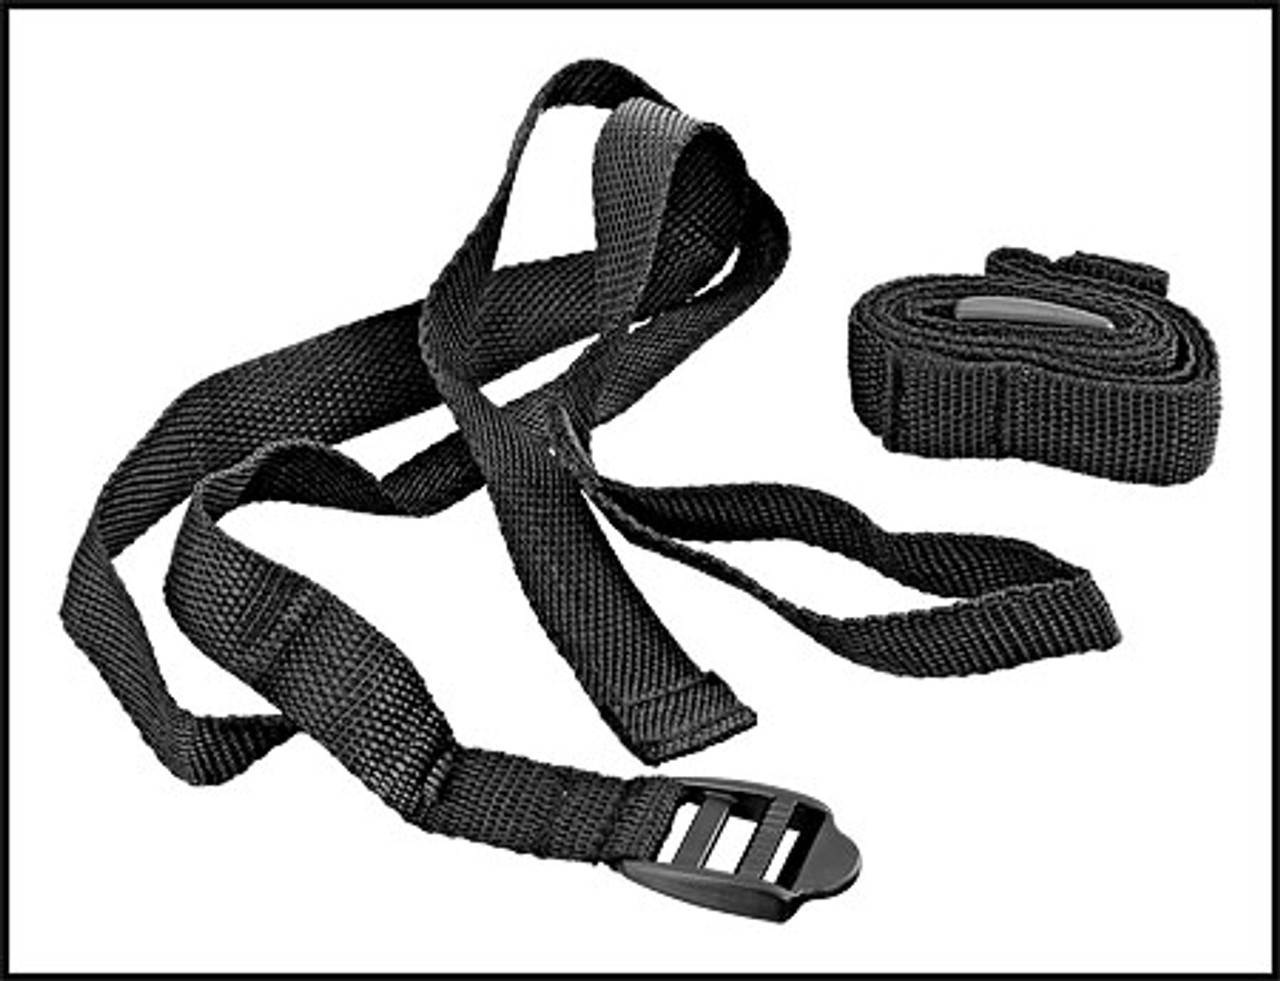 Jacuzzi/Carvin Lifting Strap (Set Of 2) (#23483407R2)